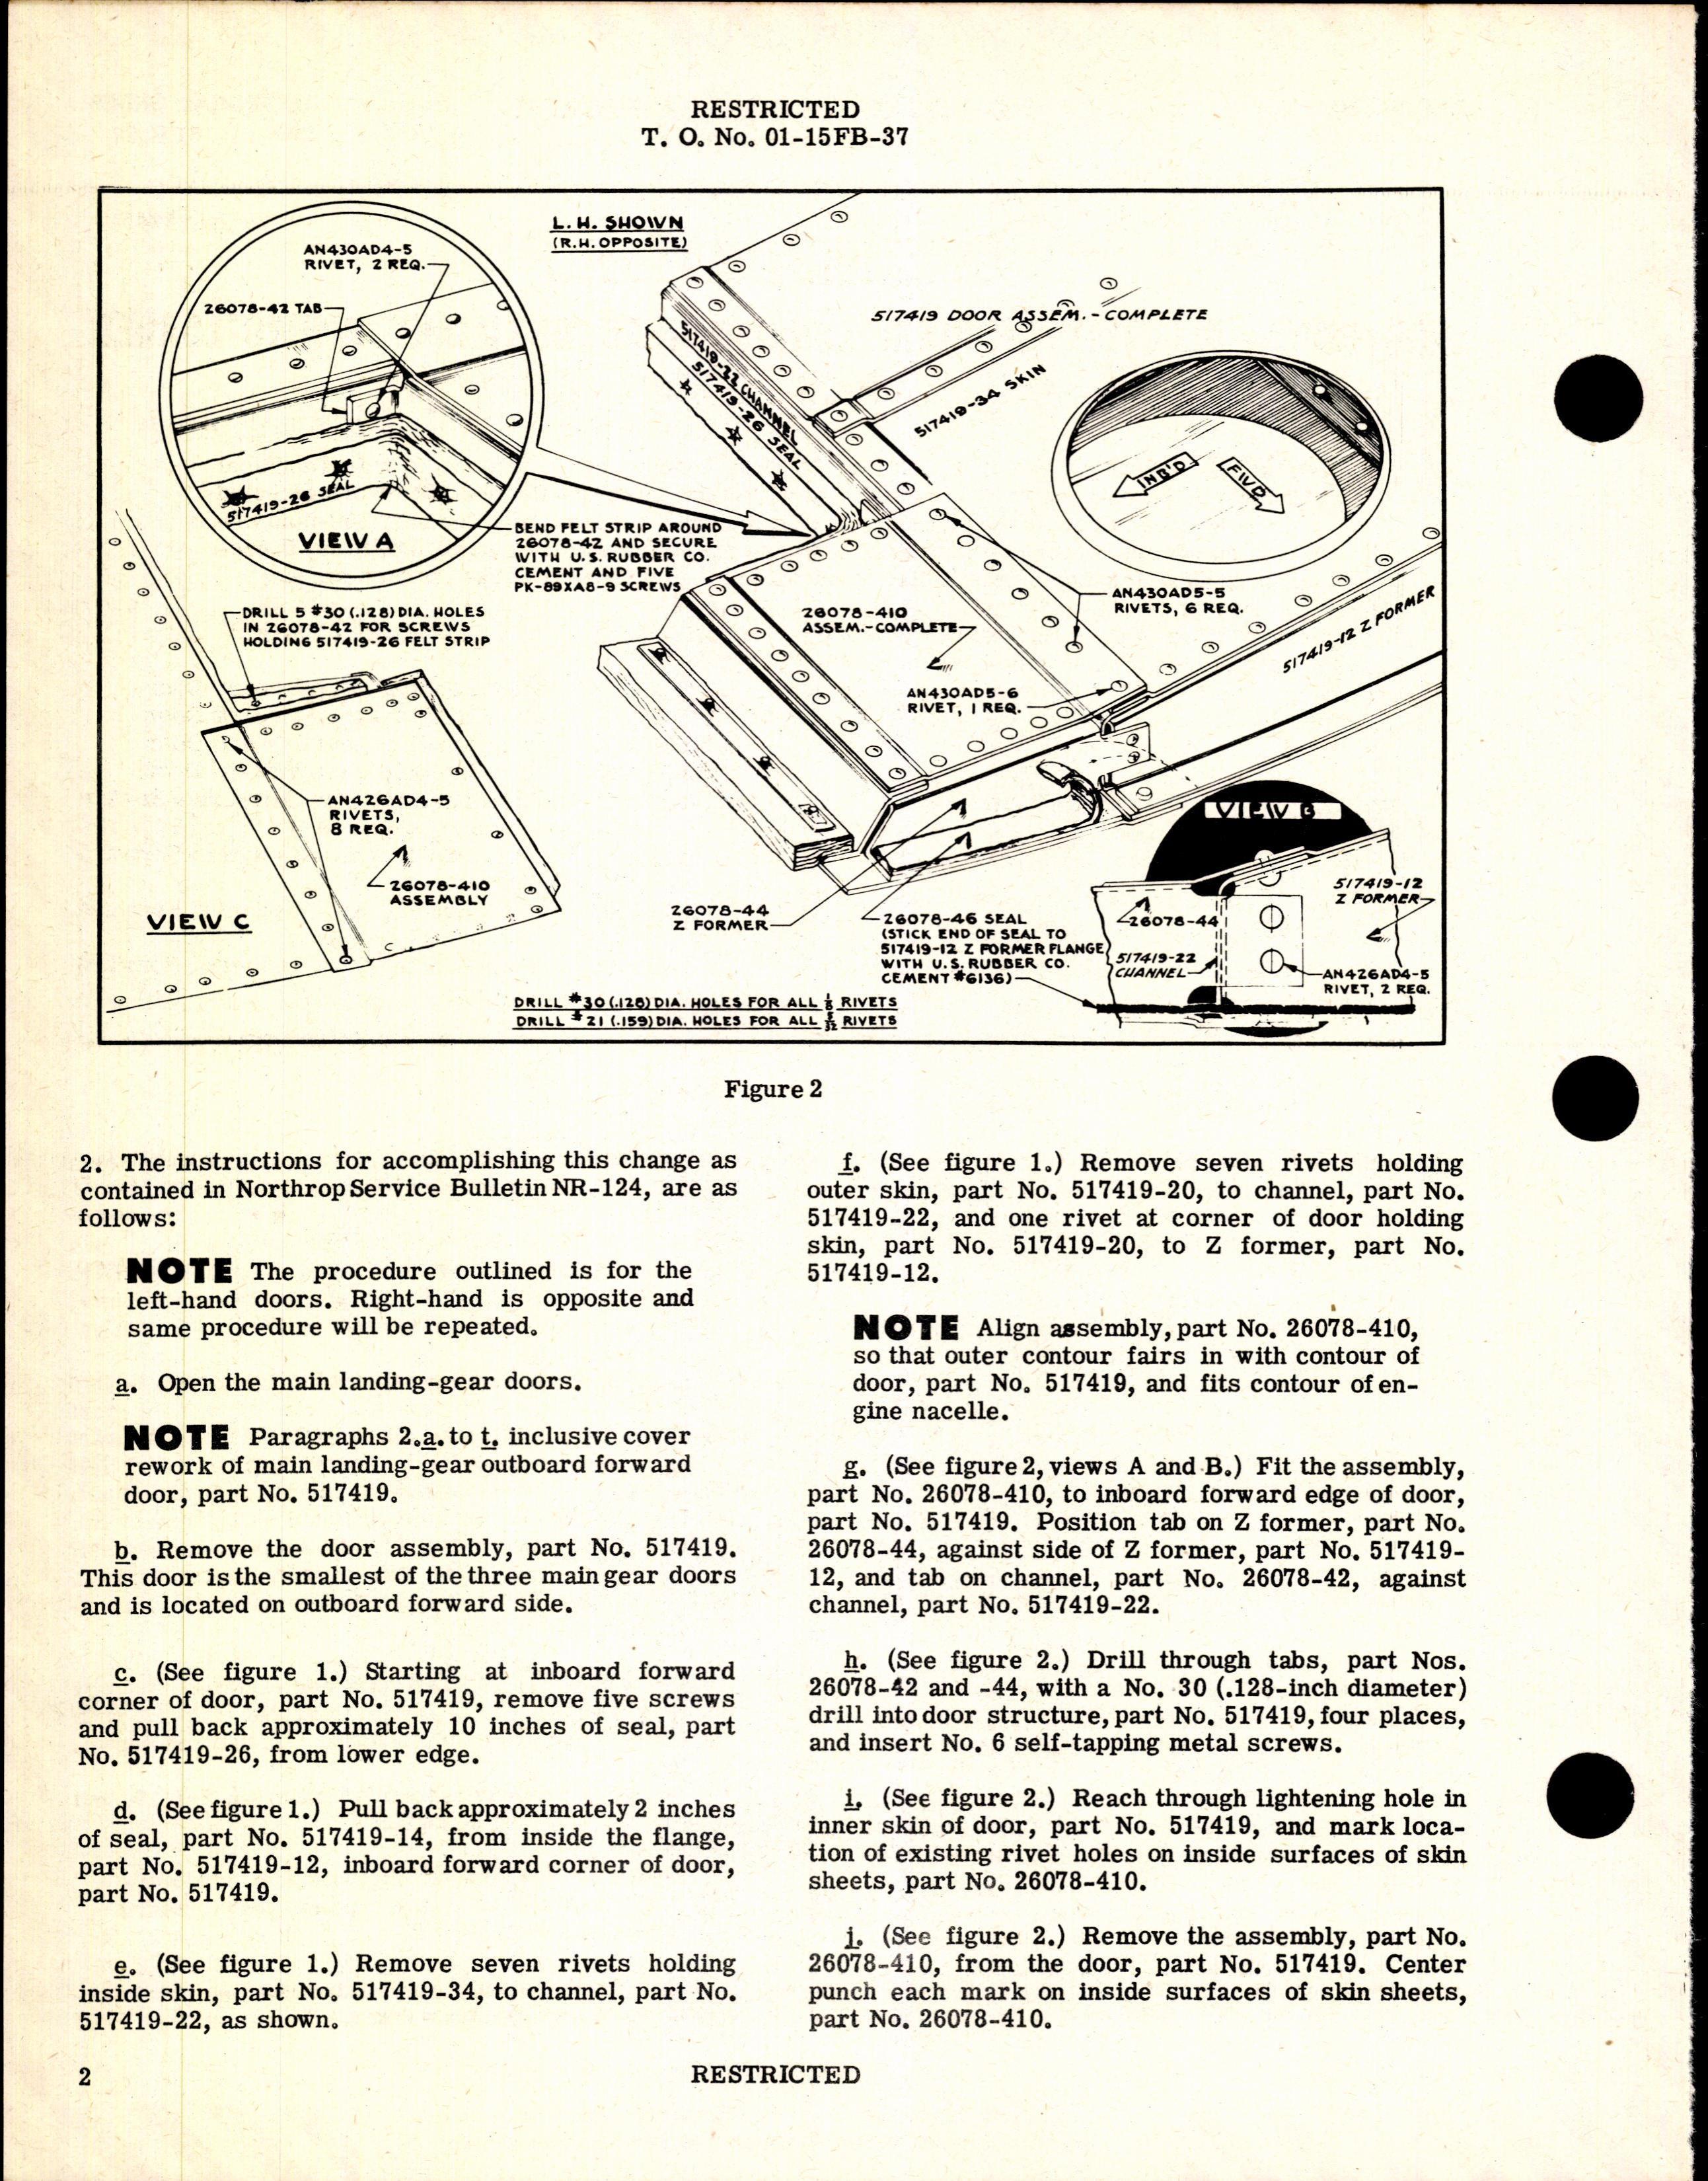 Sample page 2 from AirCorps Library document: Deletion of Main Landing-Gear Auxiliary Spring-Loaded Door for P-61B